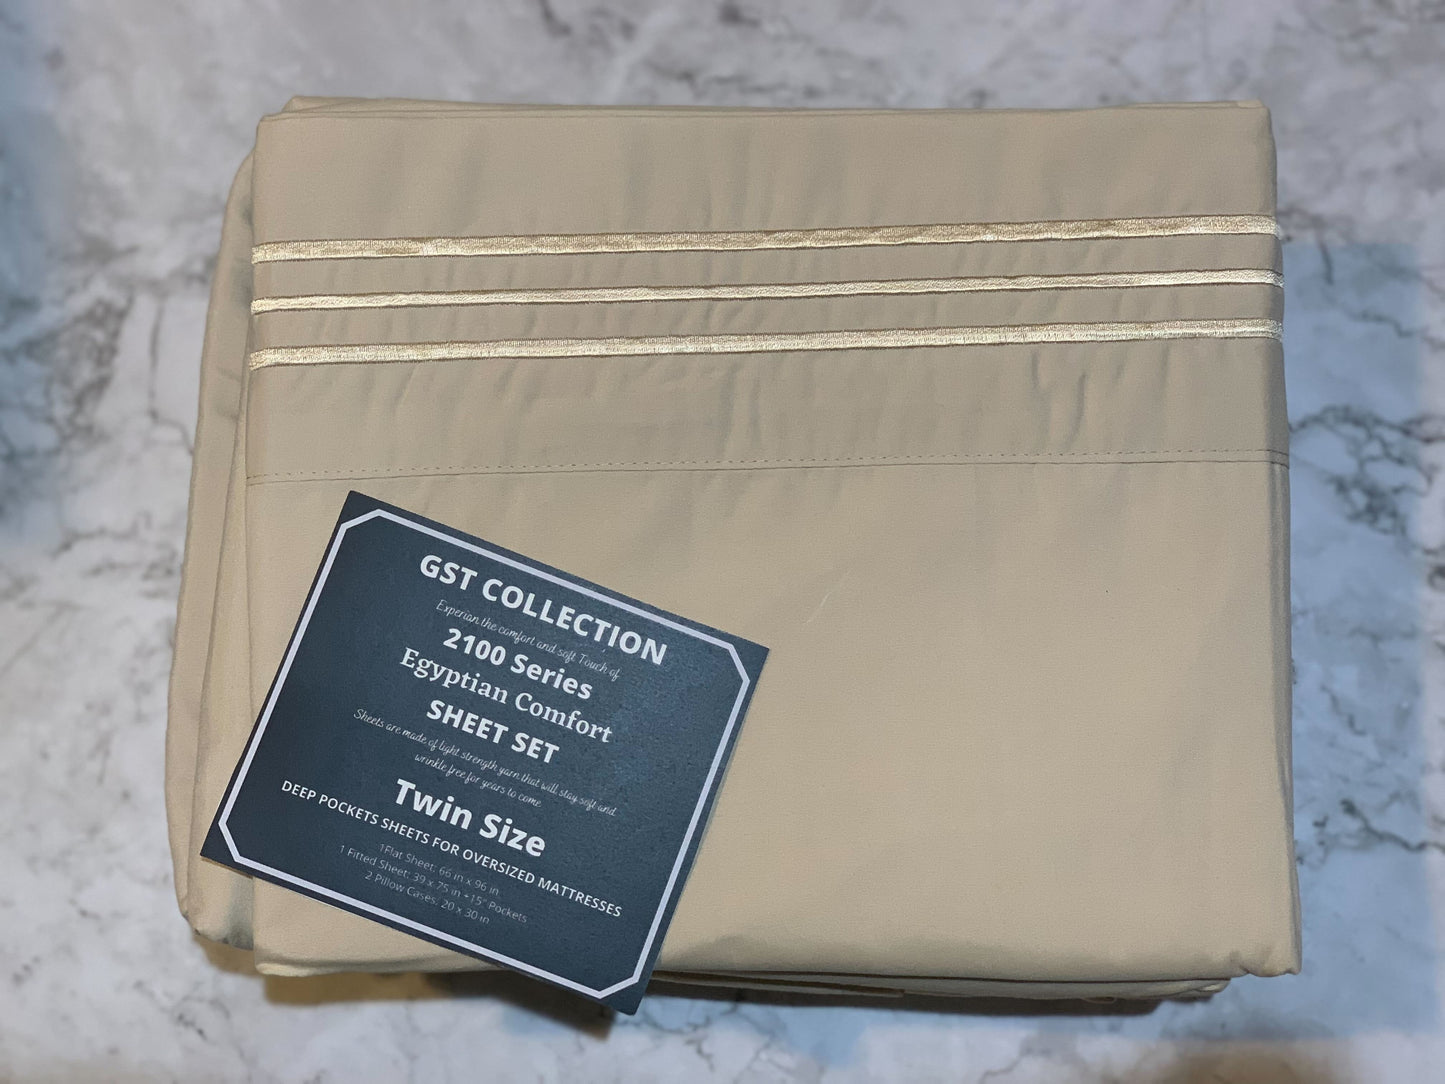 GST Designz Collection - Egyptian Comfort Bed Sheet Set - TWIN